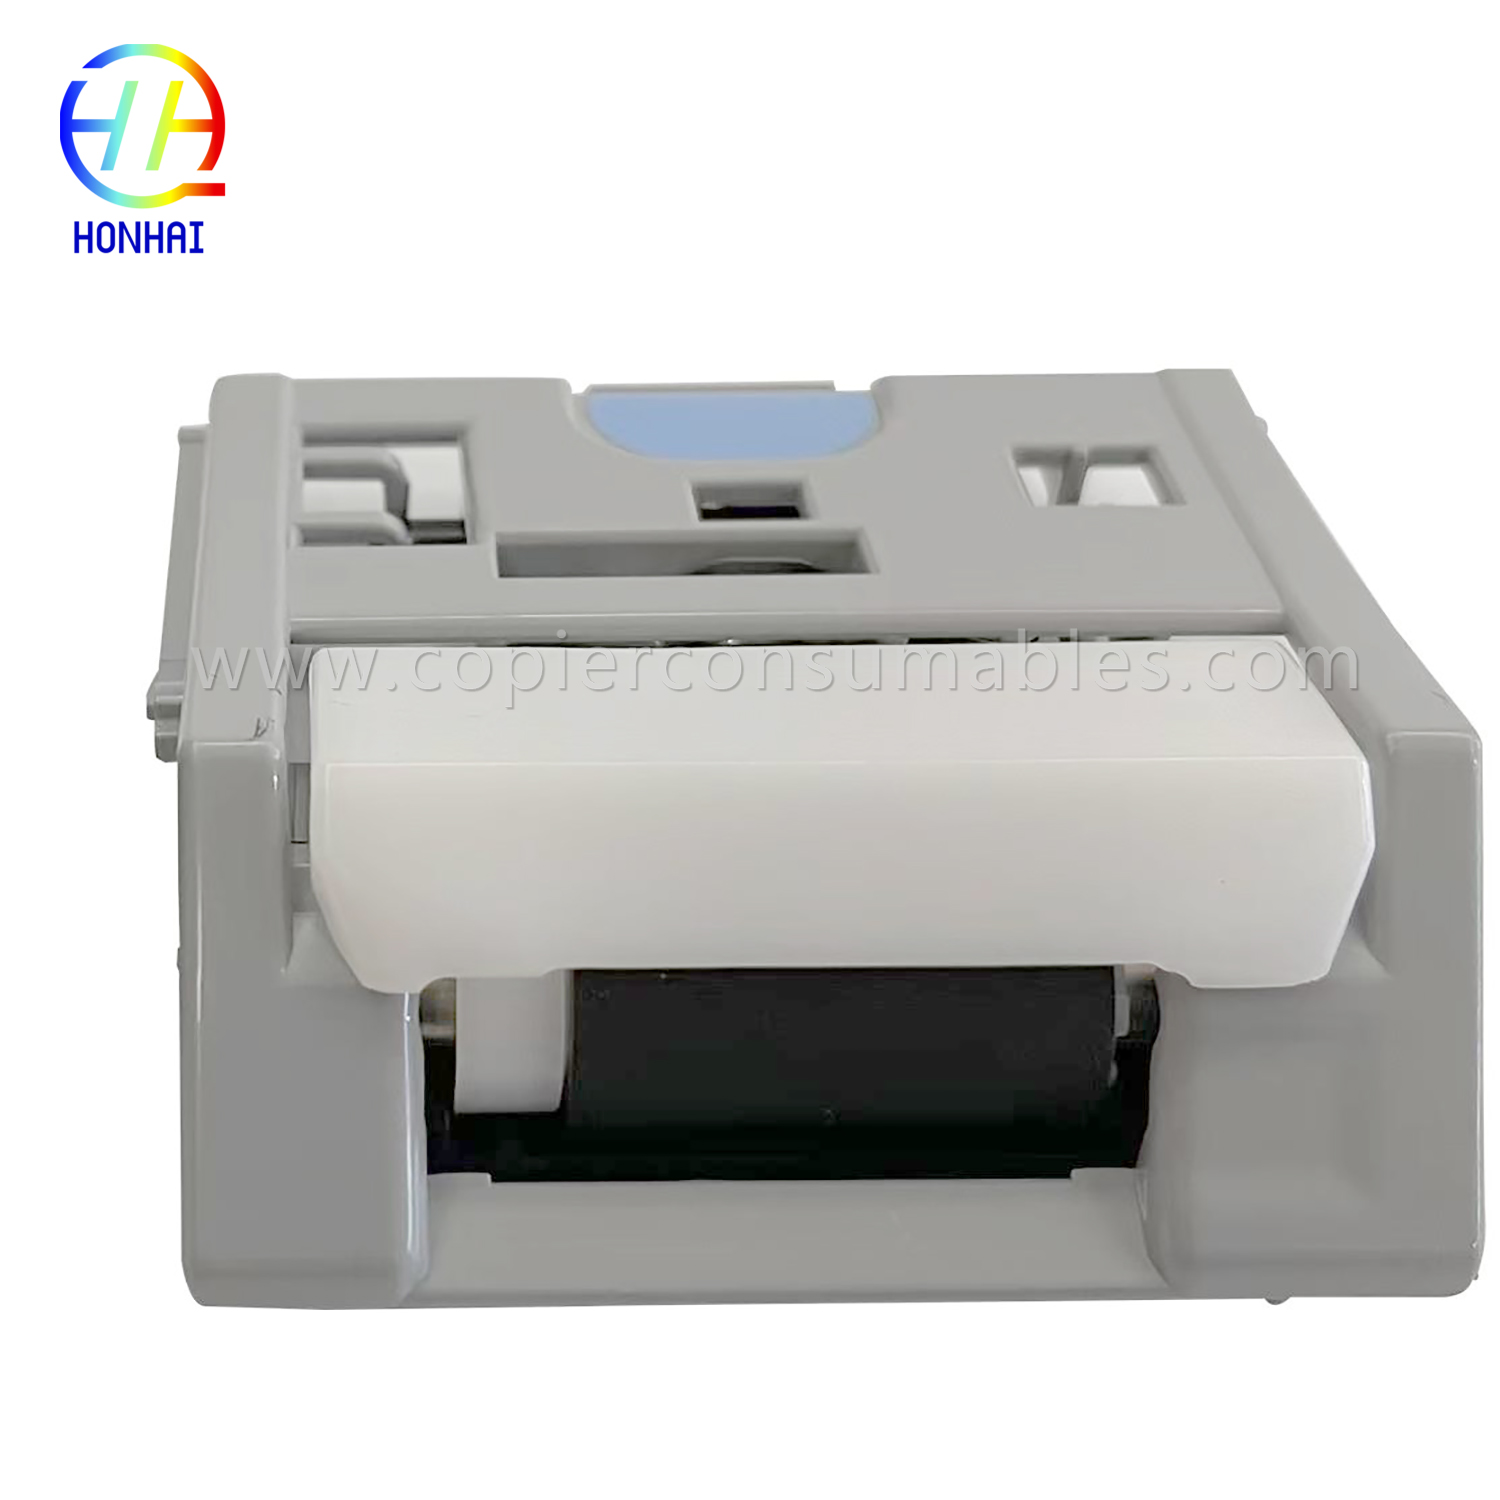 Tray 2-5 Separation Roller Assy for HP M552 M553 M577 (RM2-0064-000)